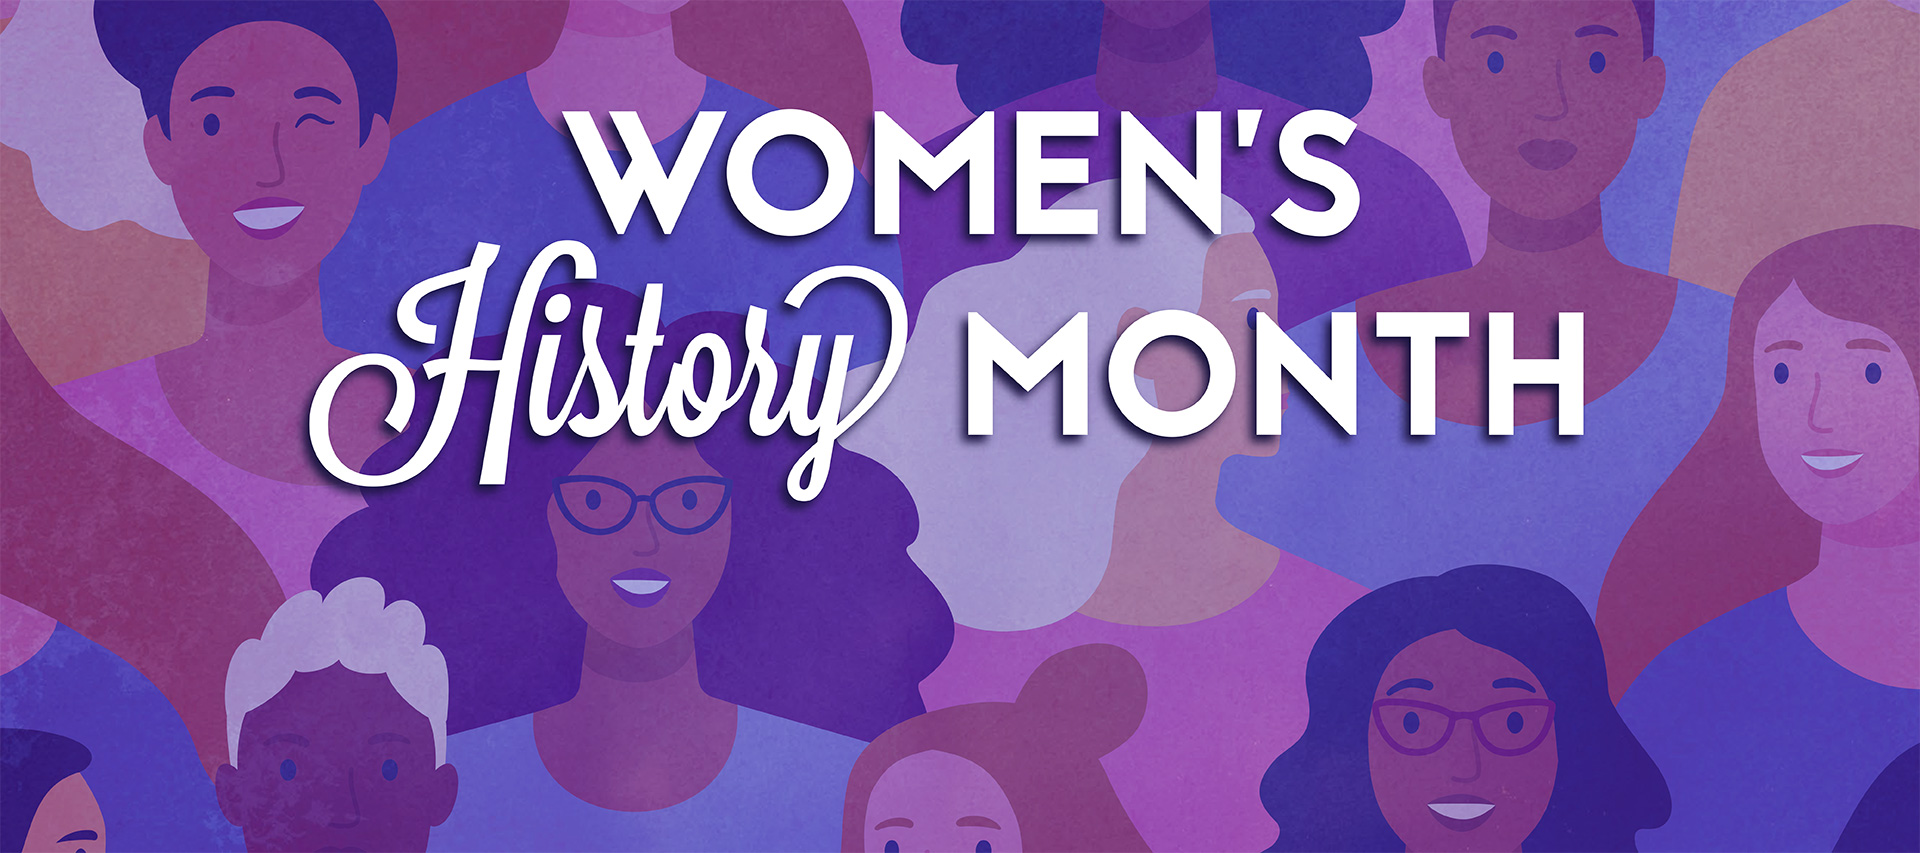 Illustration of group of diverse women in background. Text: Women's History Month